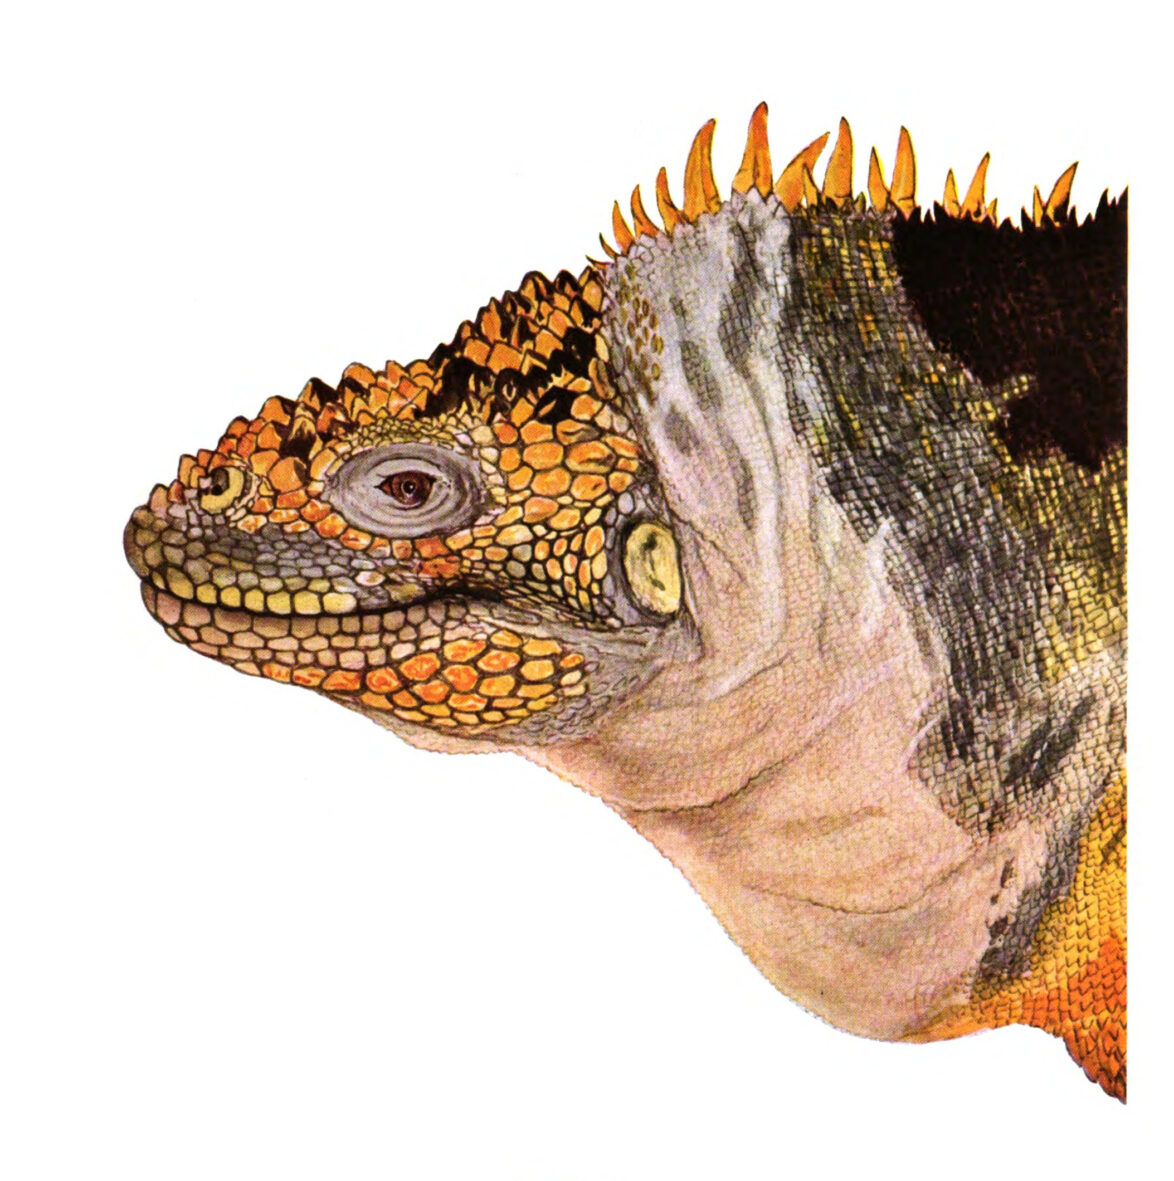 Isabel Cooper's illustration of a Galapagos land iguana from 'Galapagos: World's End'